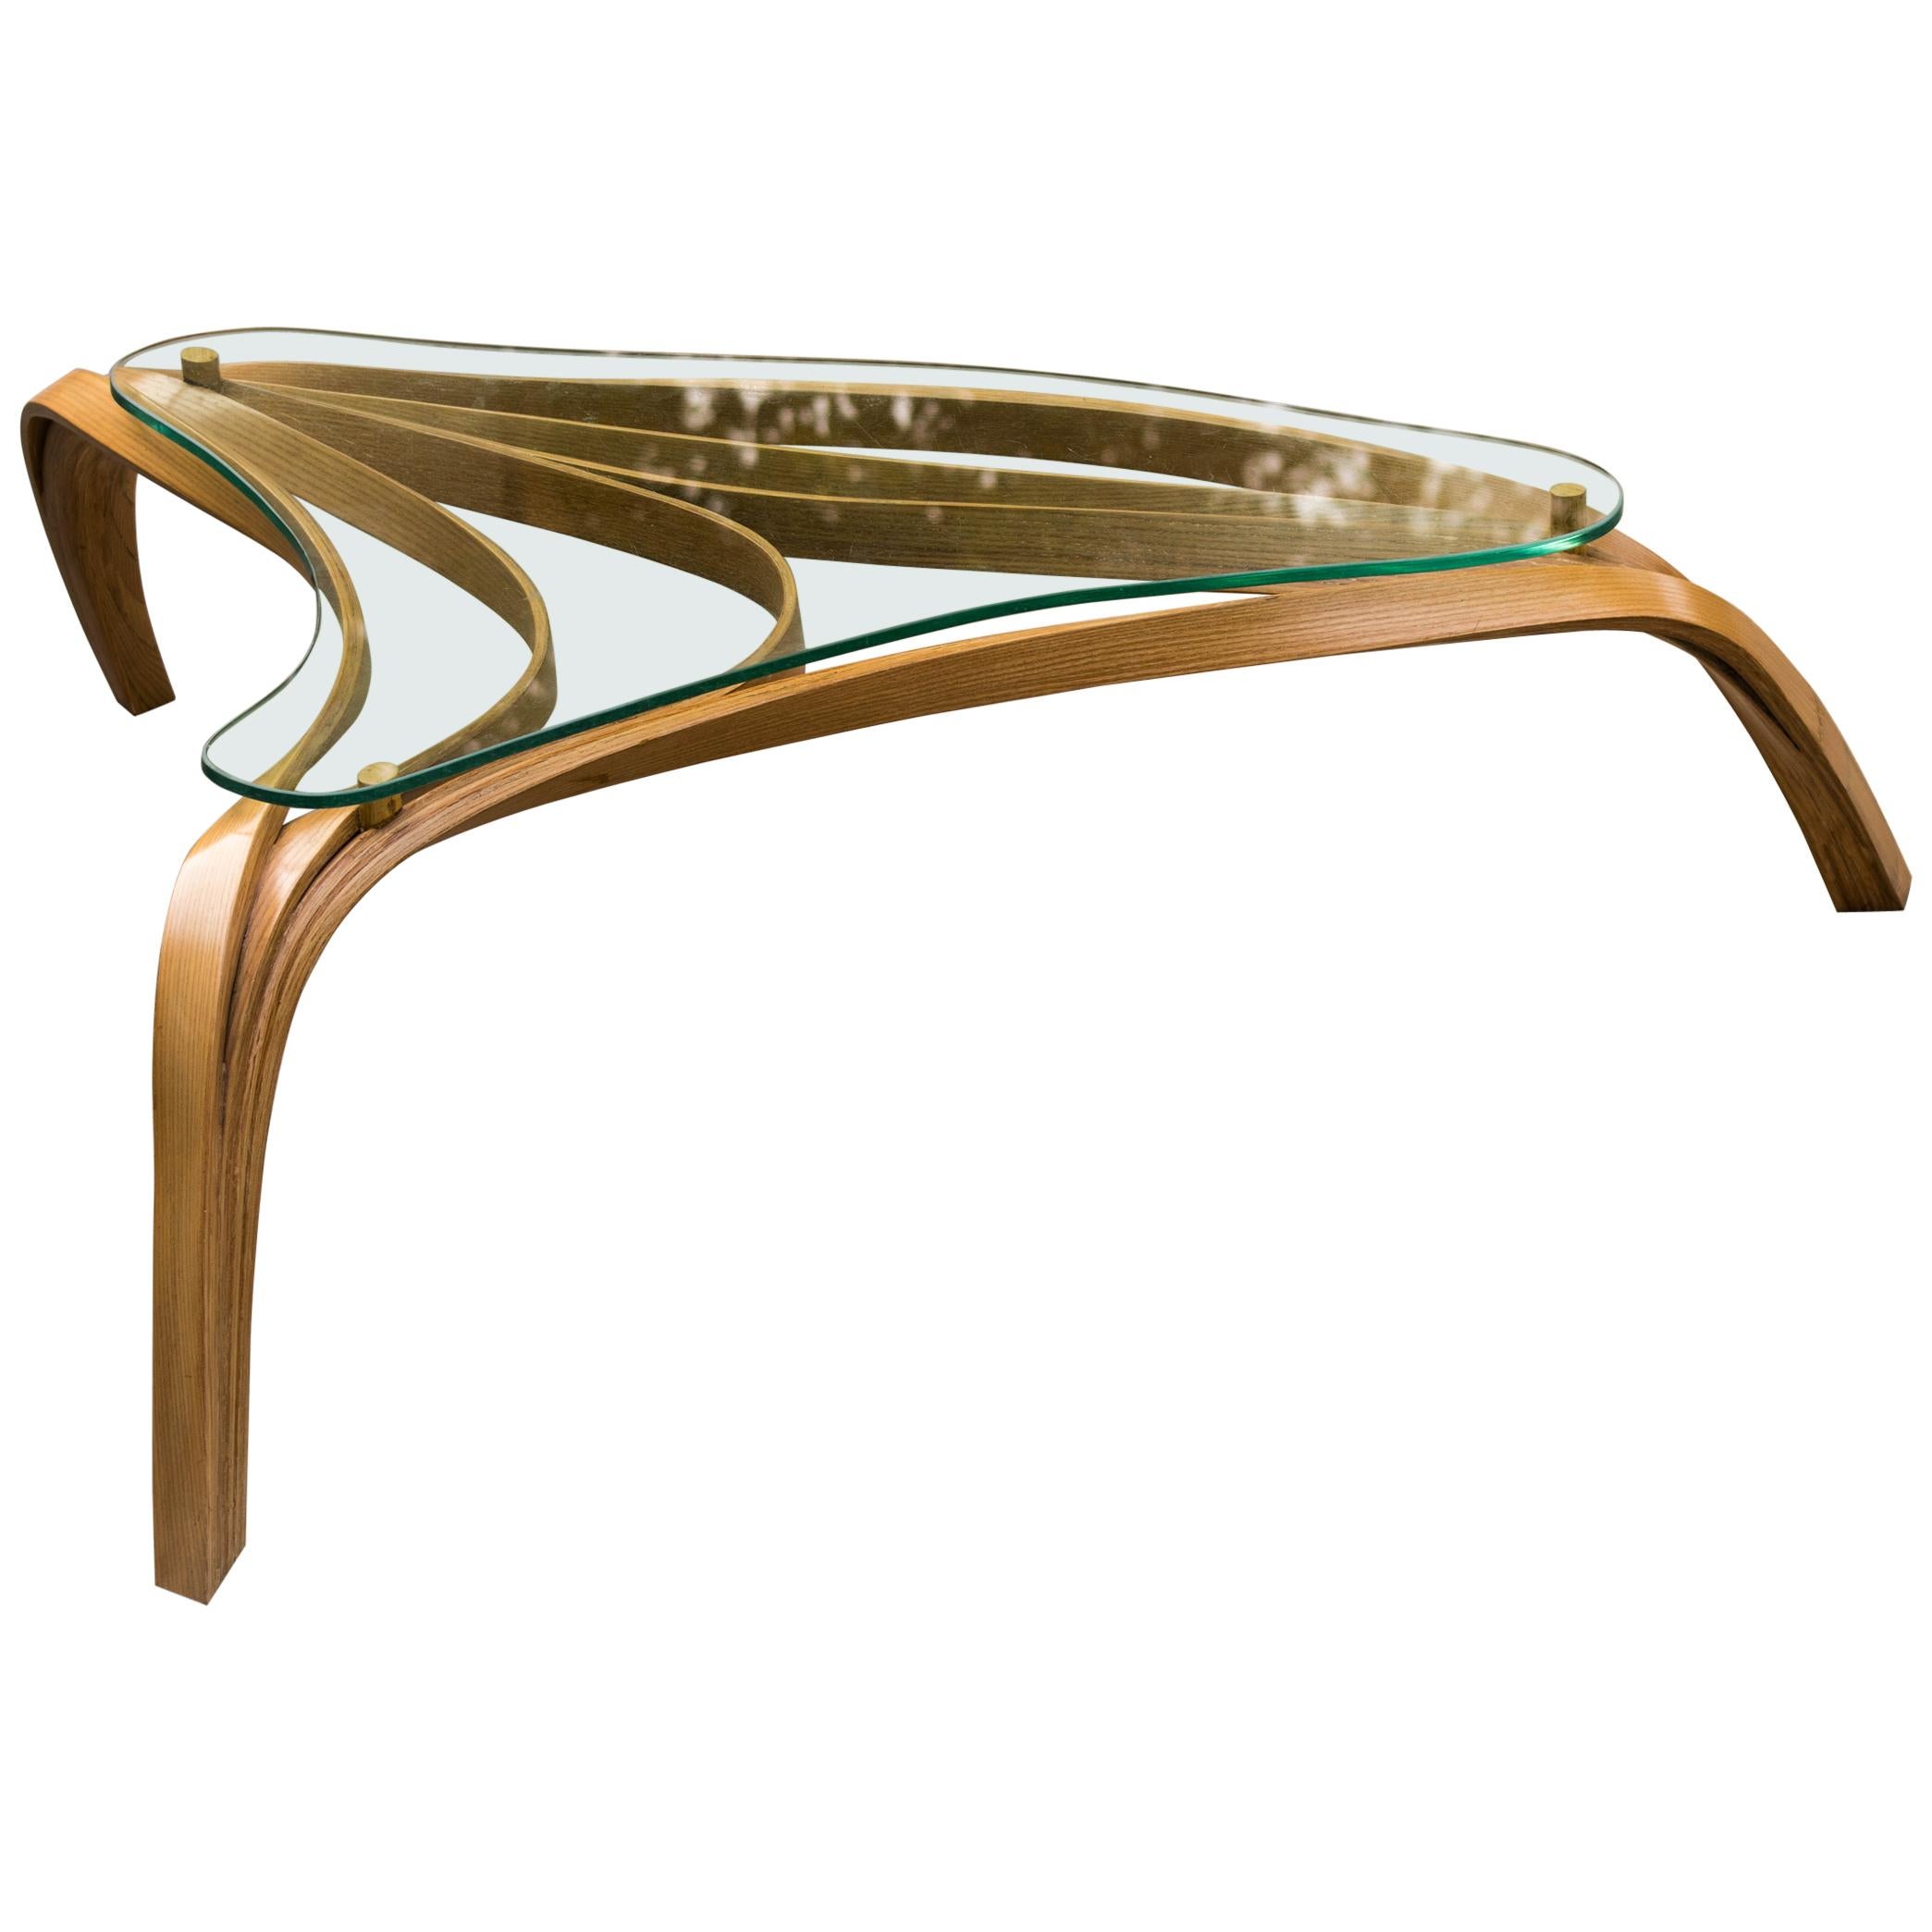 Modern Bent Wood Coffee Table with Safety Glass Top by Raka Studio